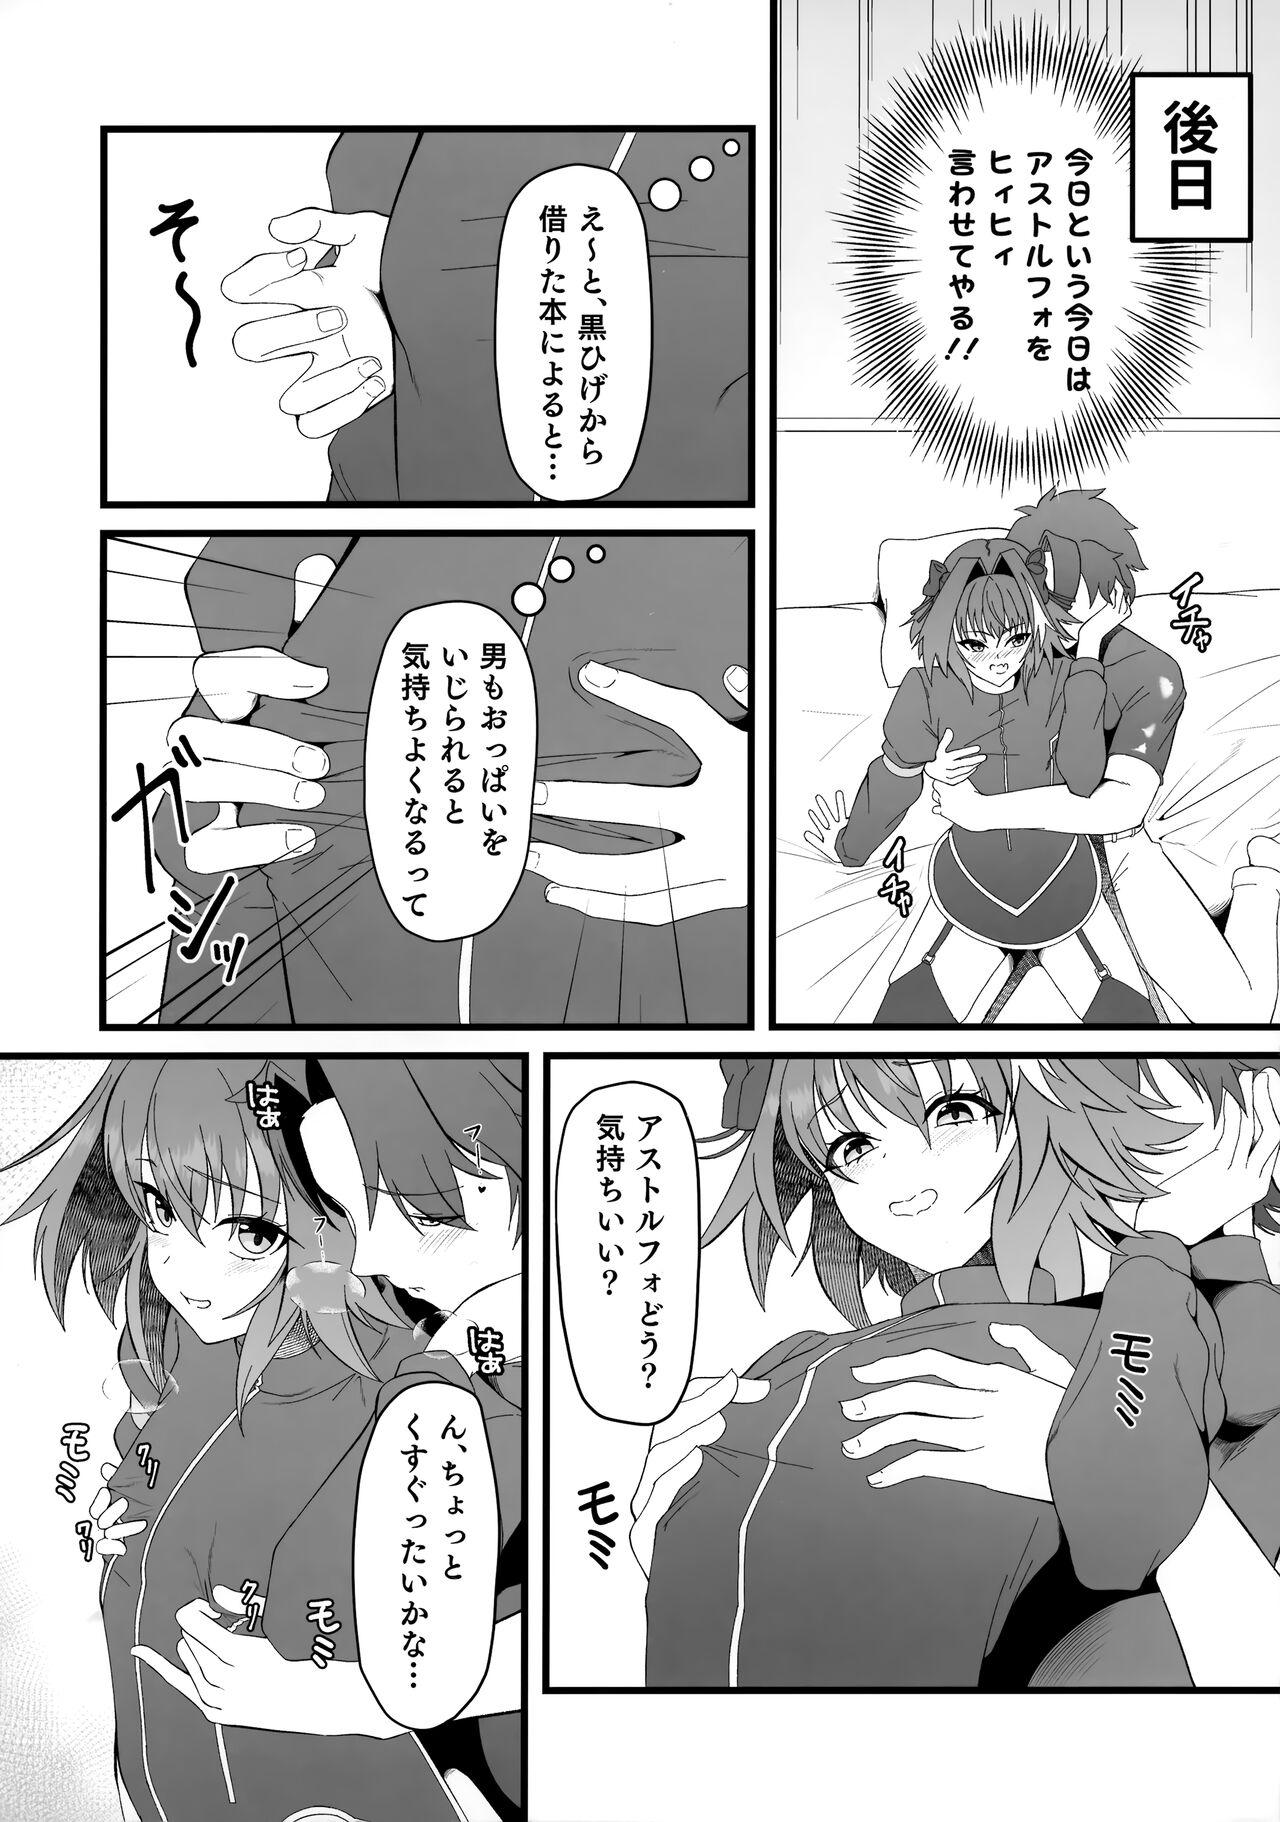 Sperm Kimi no Ichiban ni Naritakute - I wanted to be your number one. - Fate grand order Travesti - Page 5